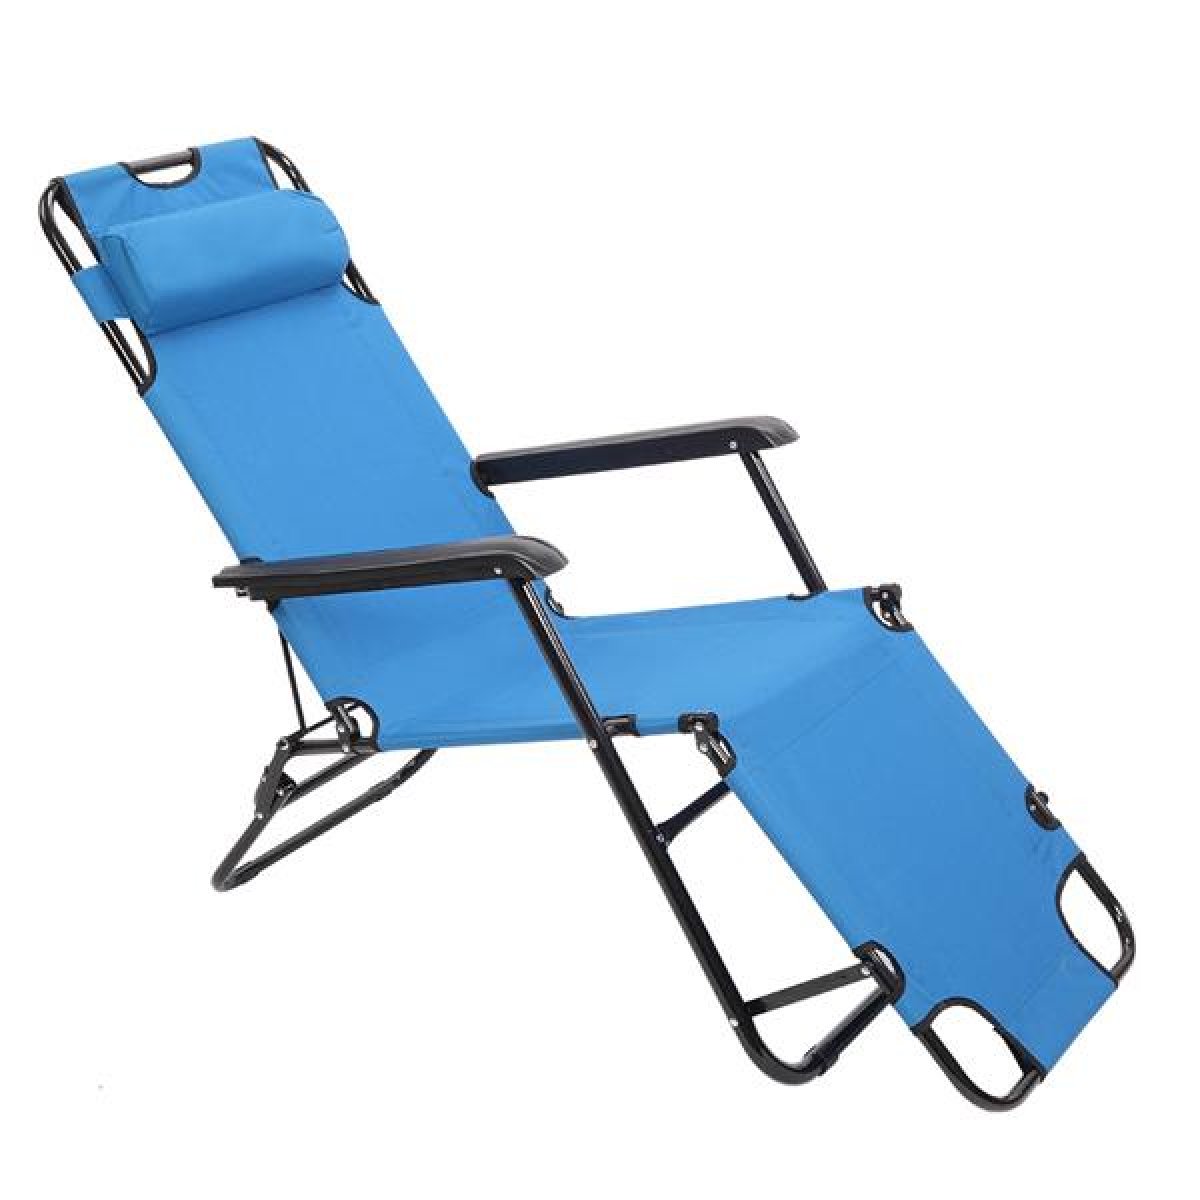 unbrand Portable Extendable Outdoor Folding Reclining Chair Dual Purposes Lounge Recliners Home Patio Beach Chair - image 5 of 13